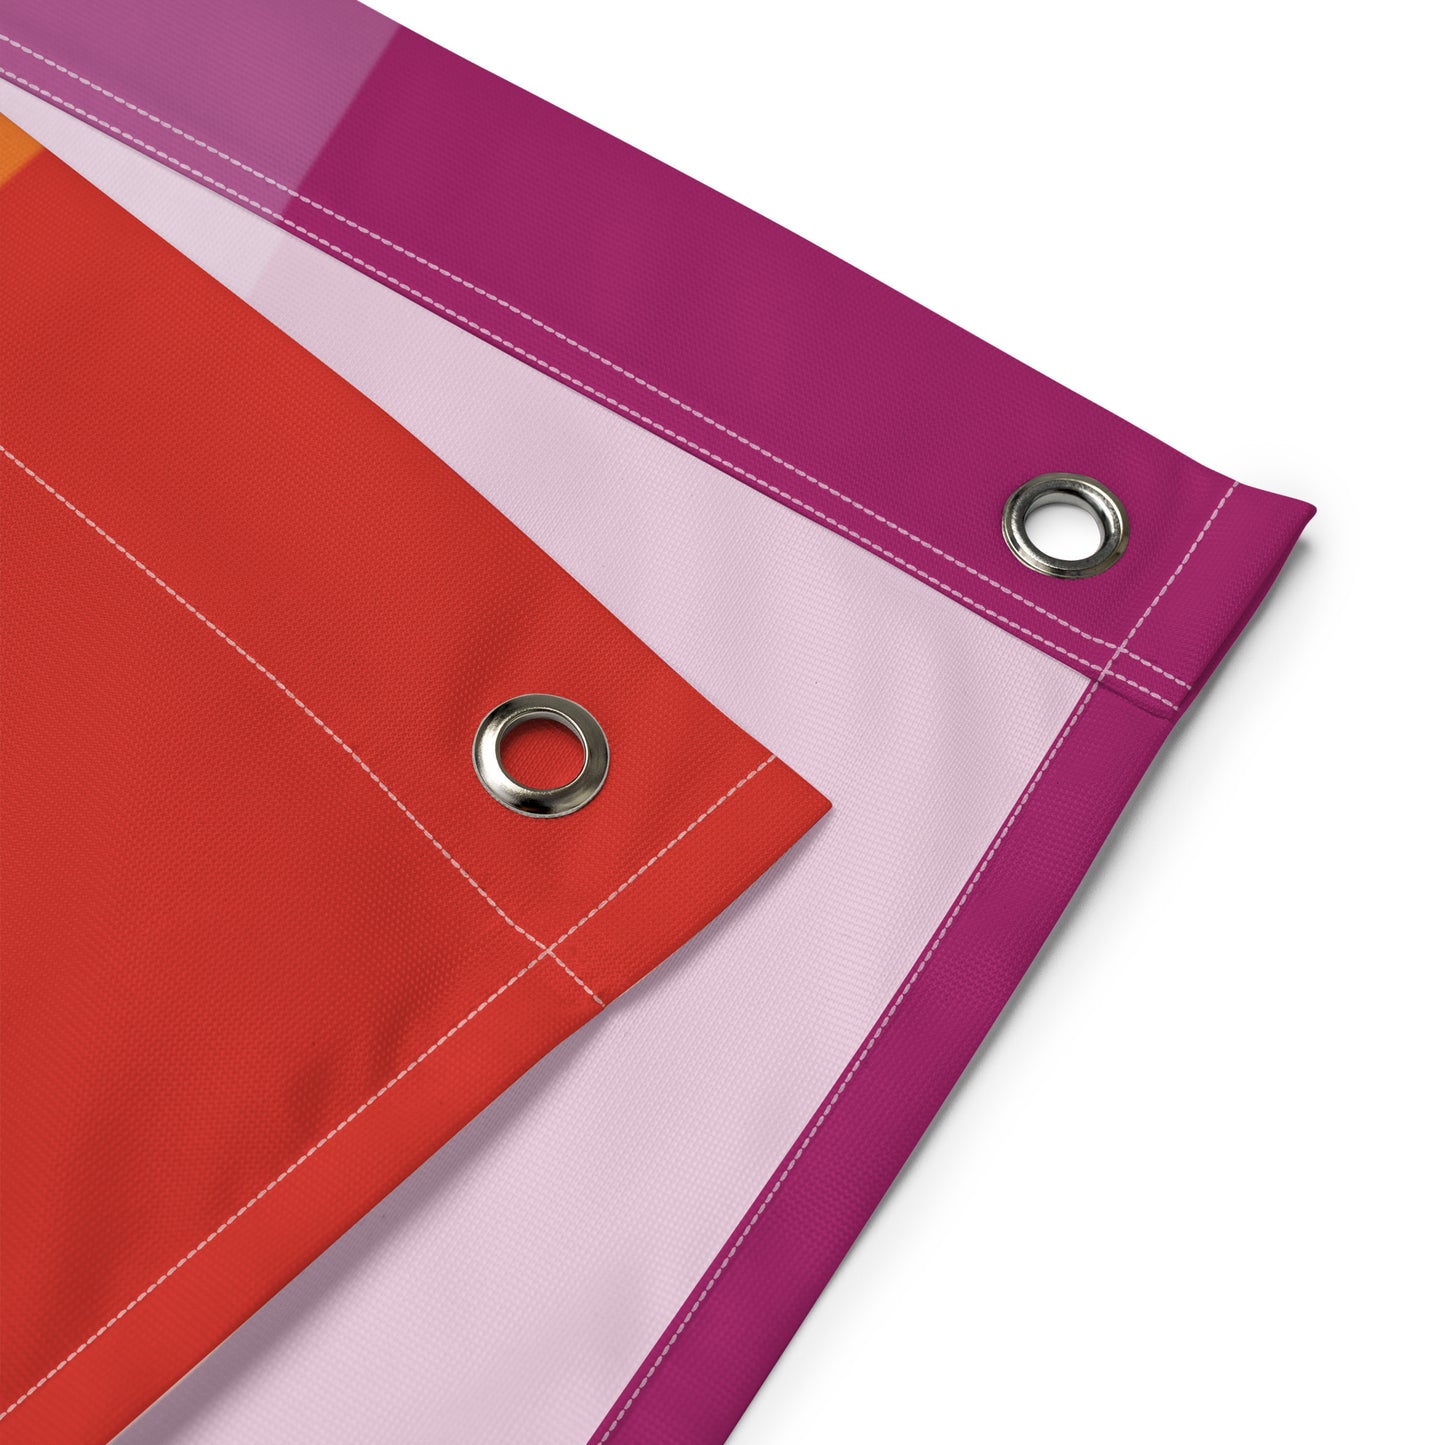 close-up of the grommets on the corners of the lesbian blackbeard pride flag